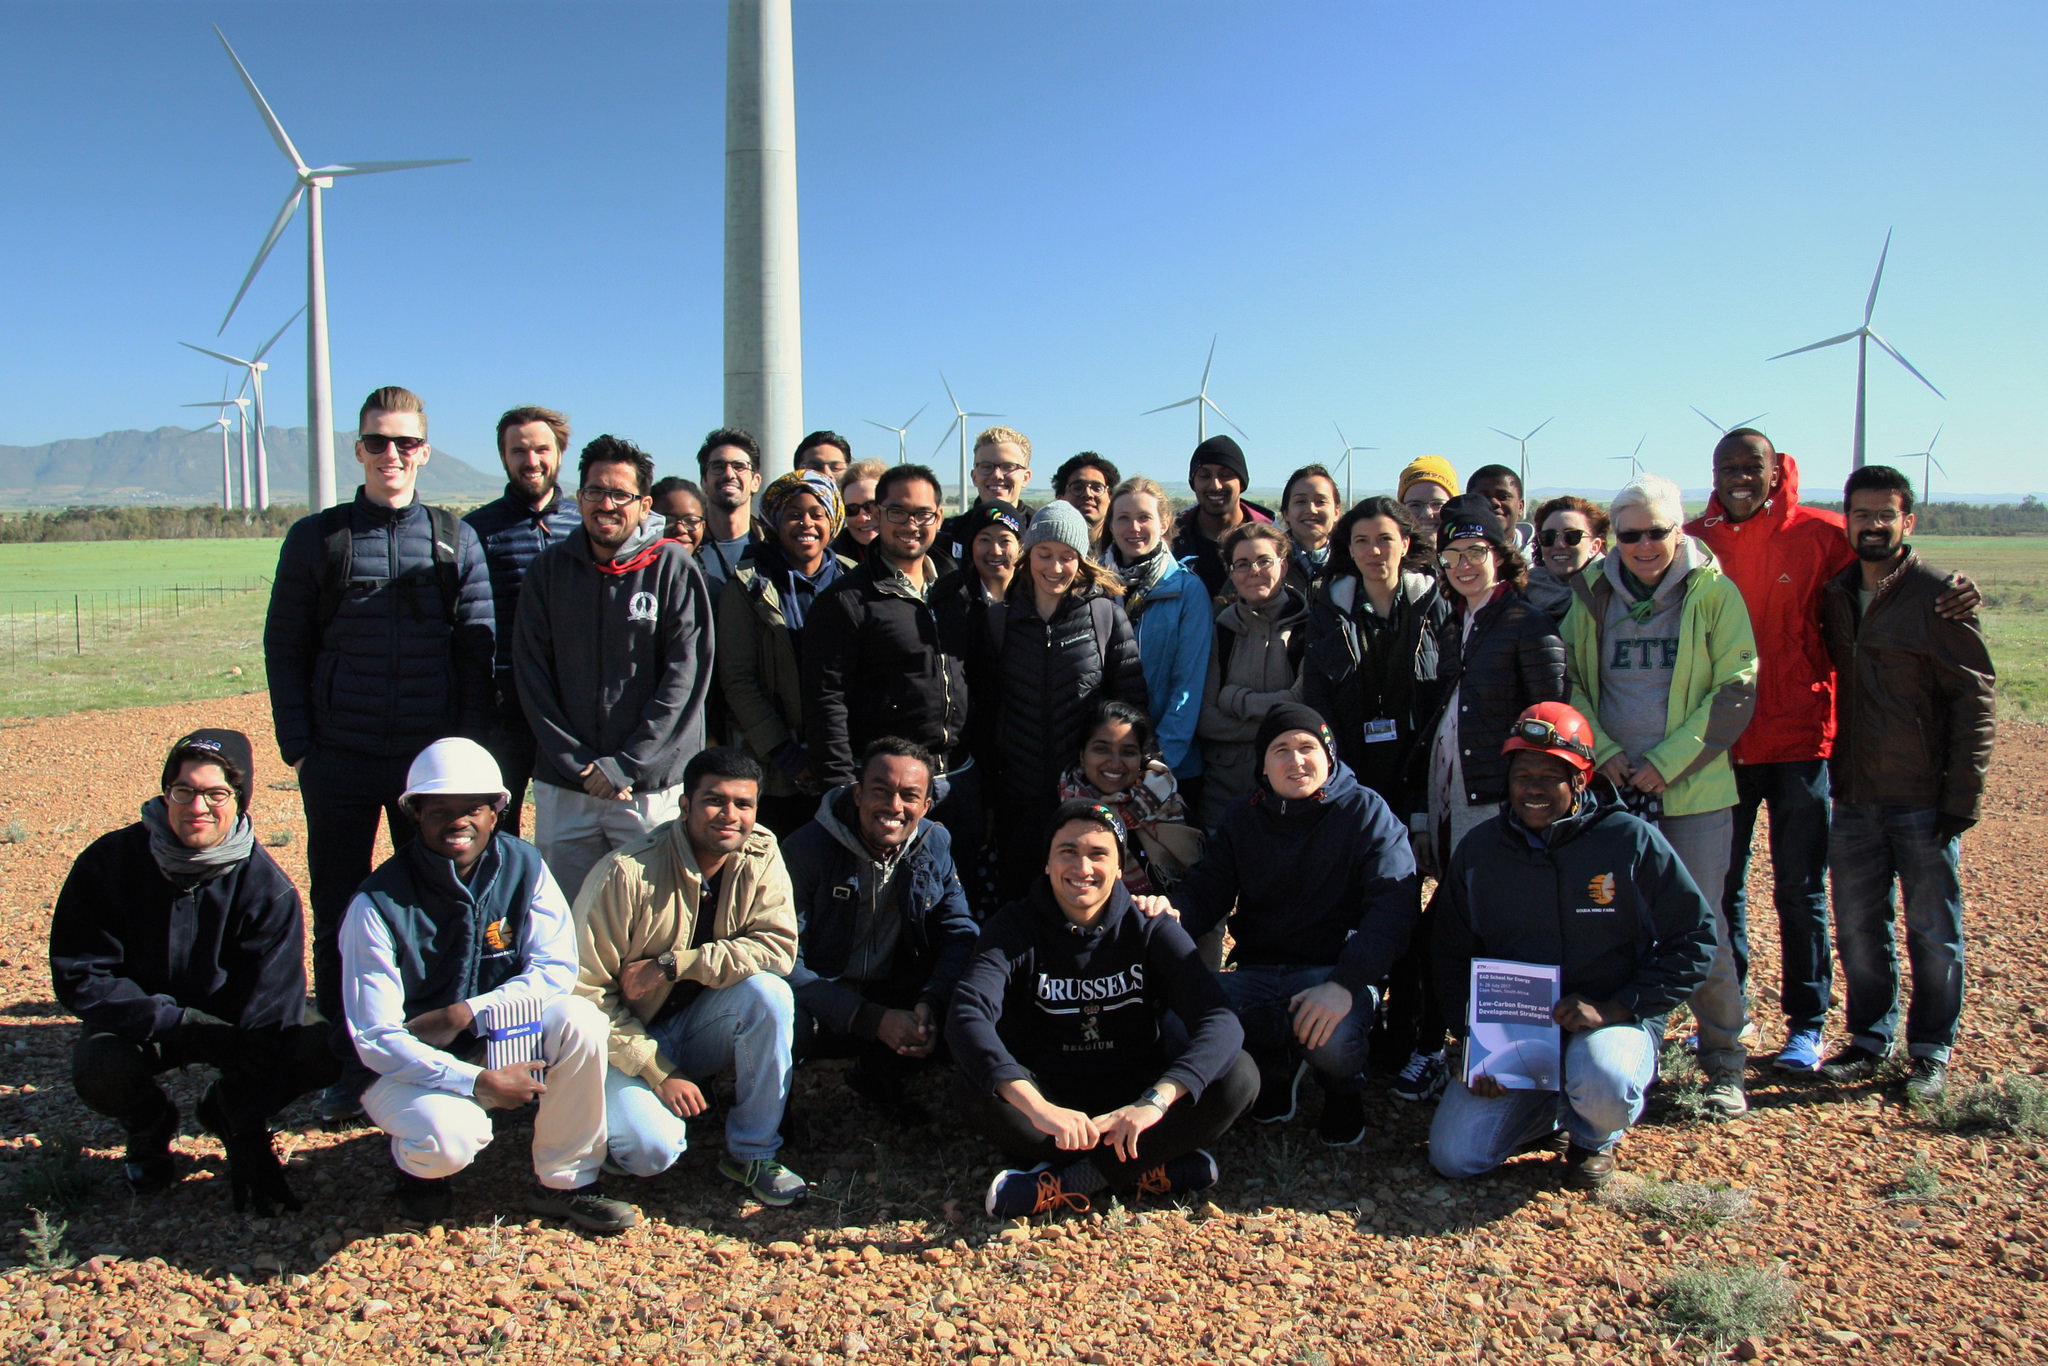 Group picture at the Gouda Wind Farm, one of the largest wind-farms in Southern Africa with 138 MW nameplate capacity. Photo credit: Energy Politics Group and ETH Global.